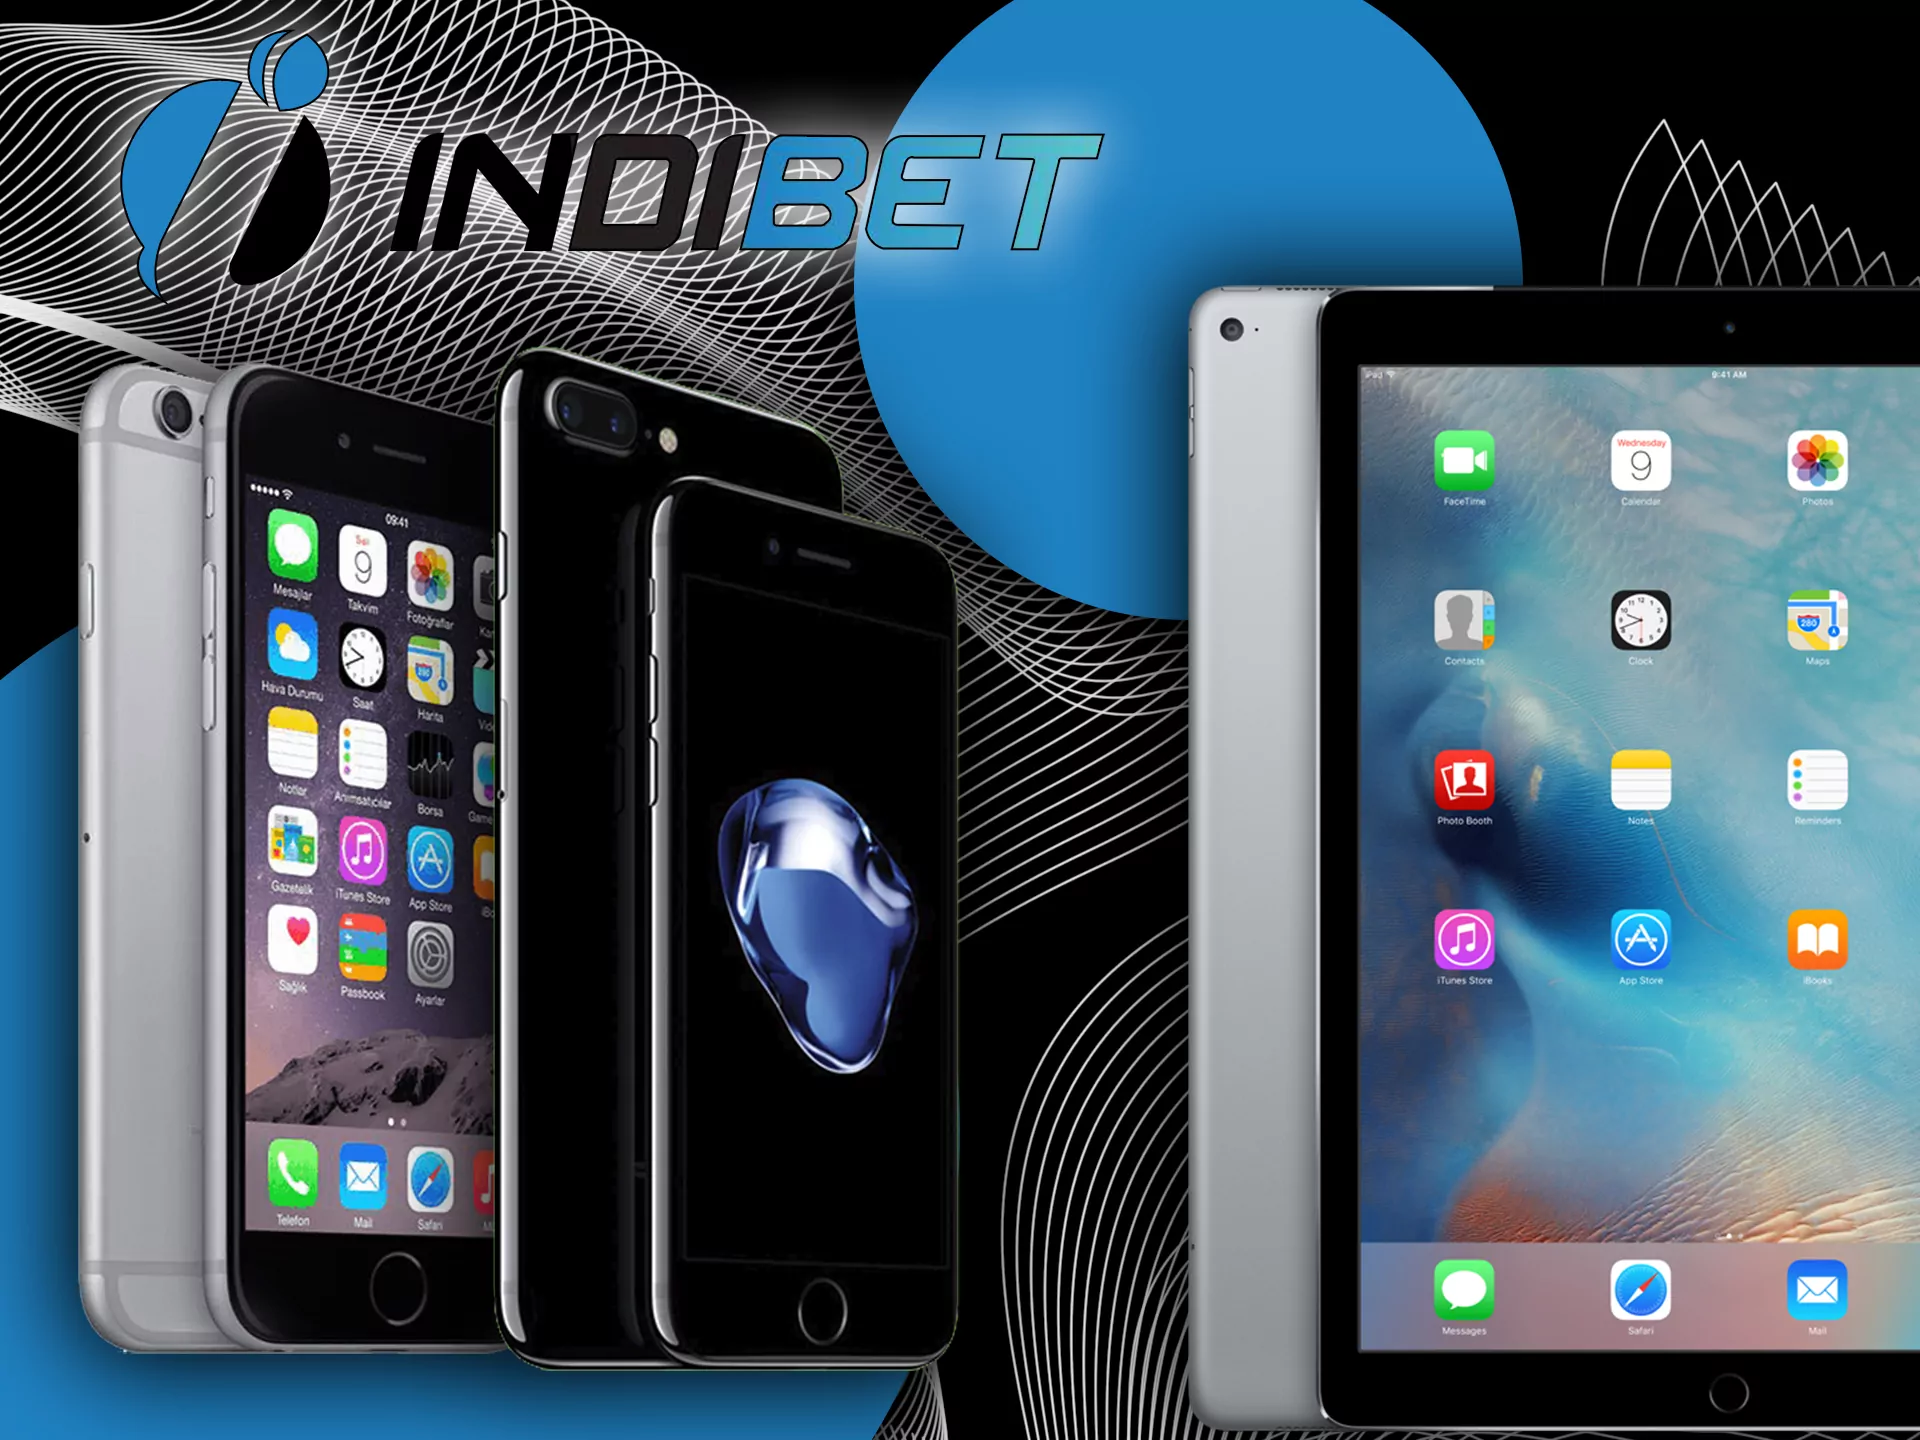 You can launch Indibet on every modern Apple device.